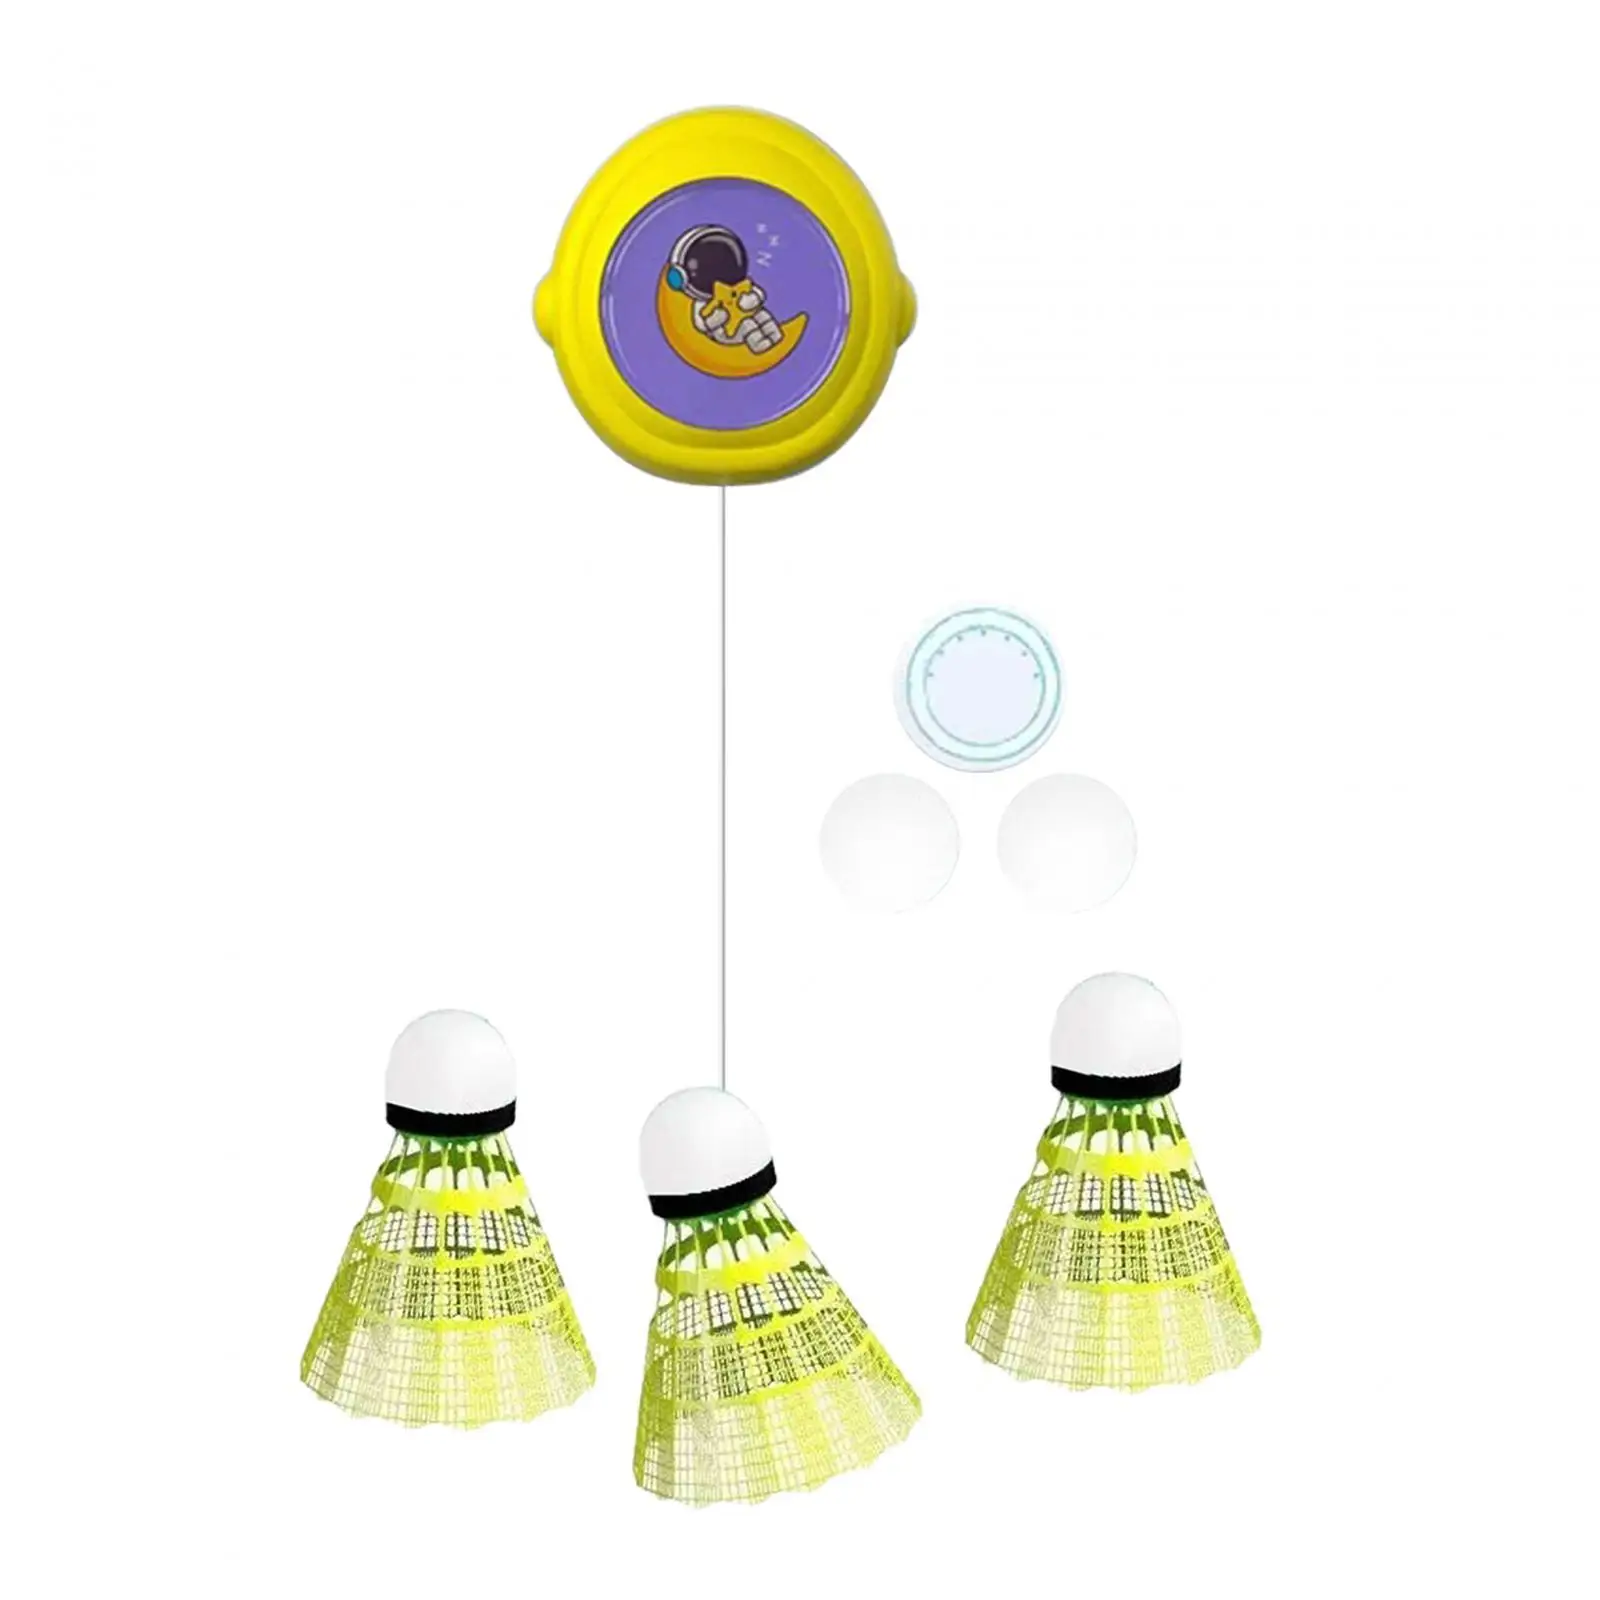 Badminton Solo Trainer Badminton Training Kids Adults Interactive Toys Training Device Single Player Practice for Game Home